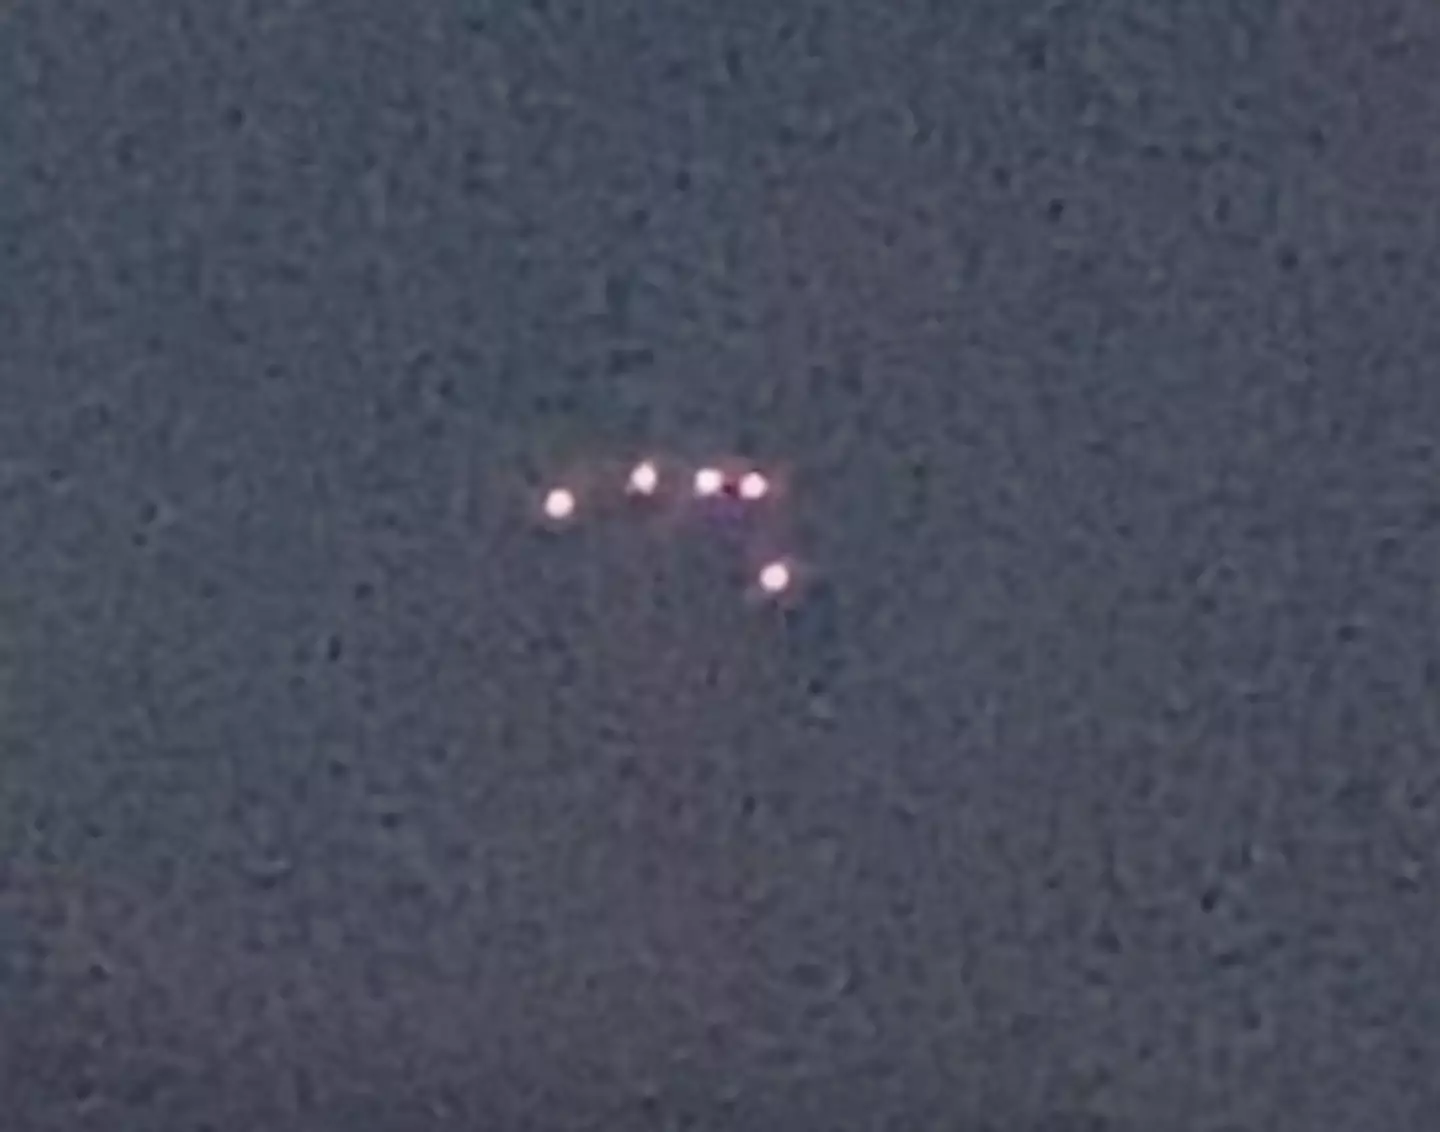 The UFO hovered over the base for 10 minutes.